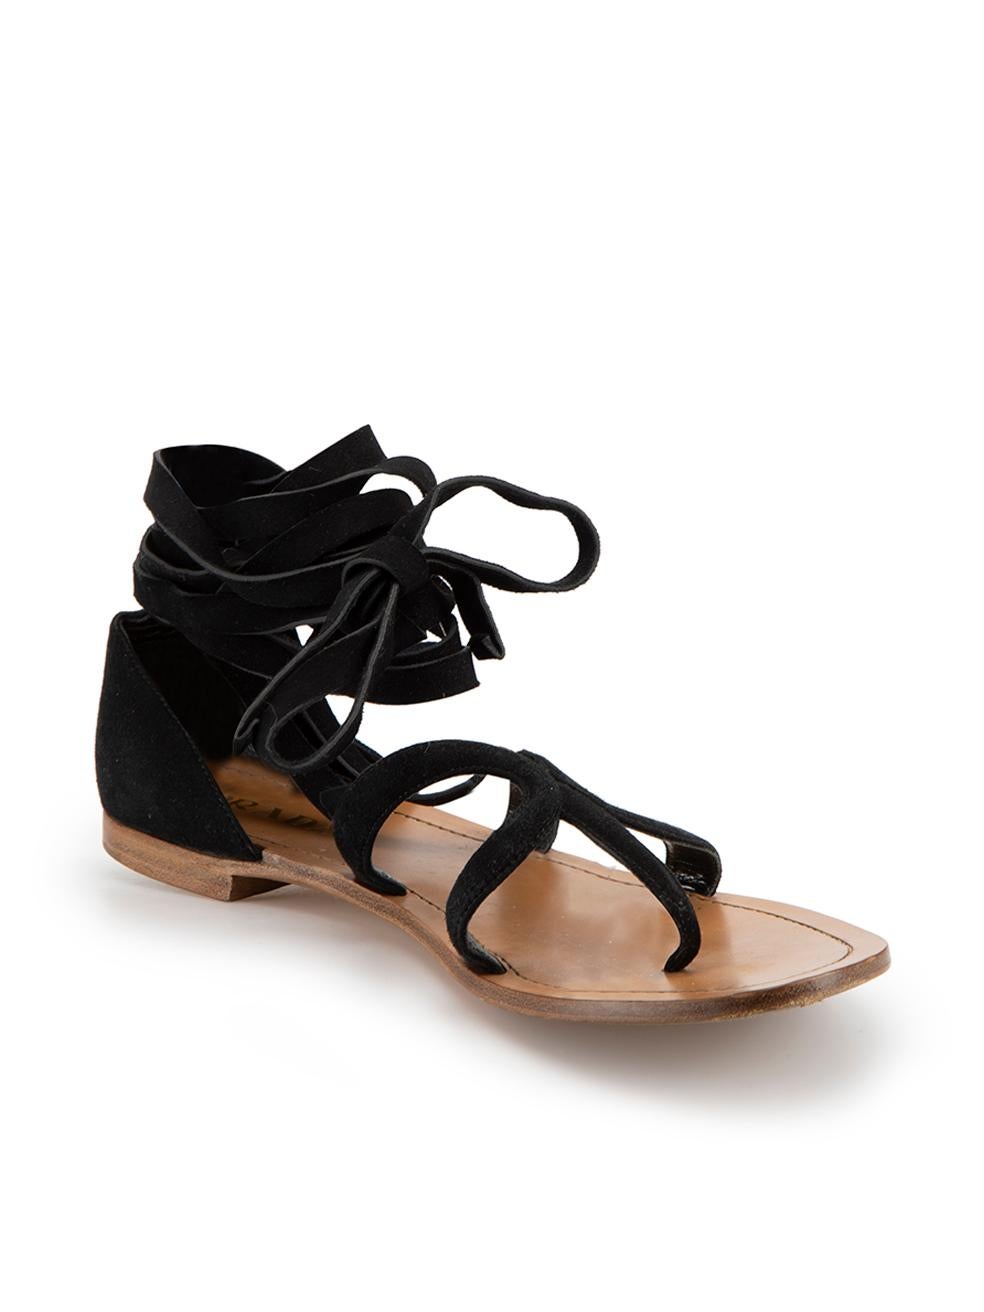 CONDITION is Very good. Hardly any visible wear to sandals is evident on this used Prada designer resale item.



Details


Black

Suede

Flat

 Strappy

Ankle/Calf tie fastening





Made in Italy 

 

Composition

Suede and Leather



Size &